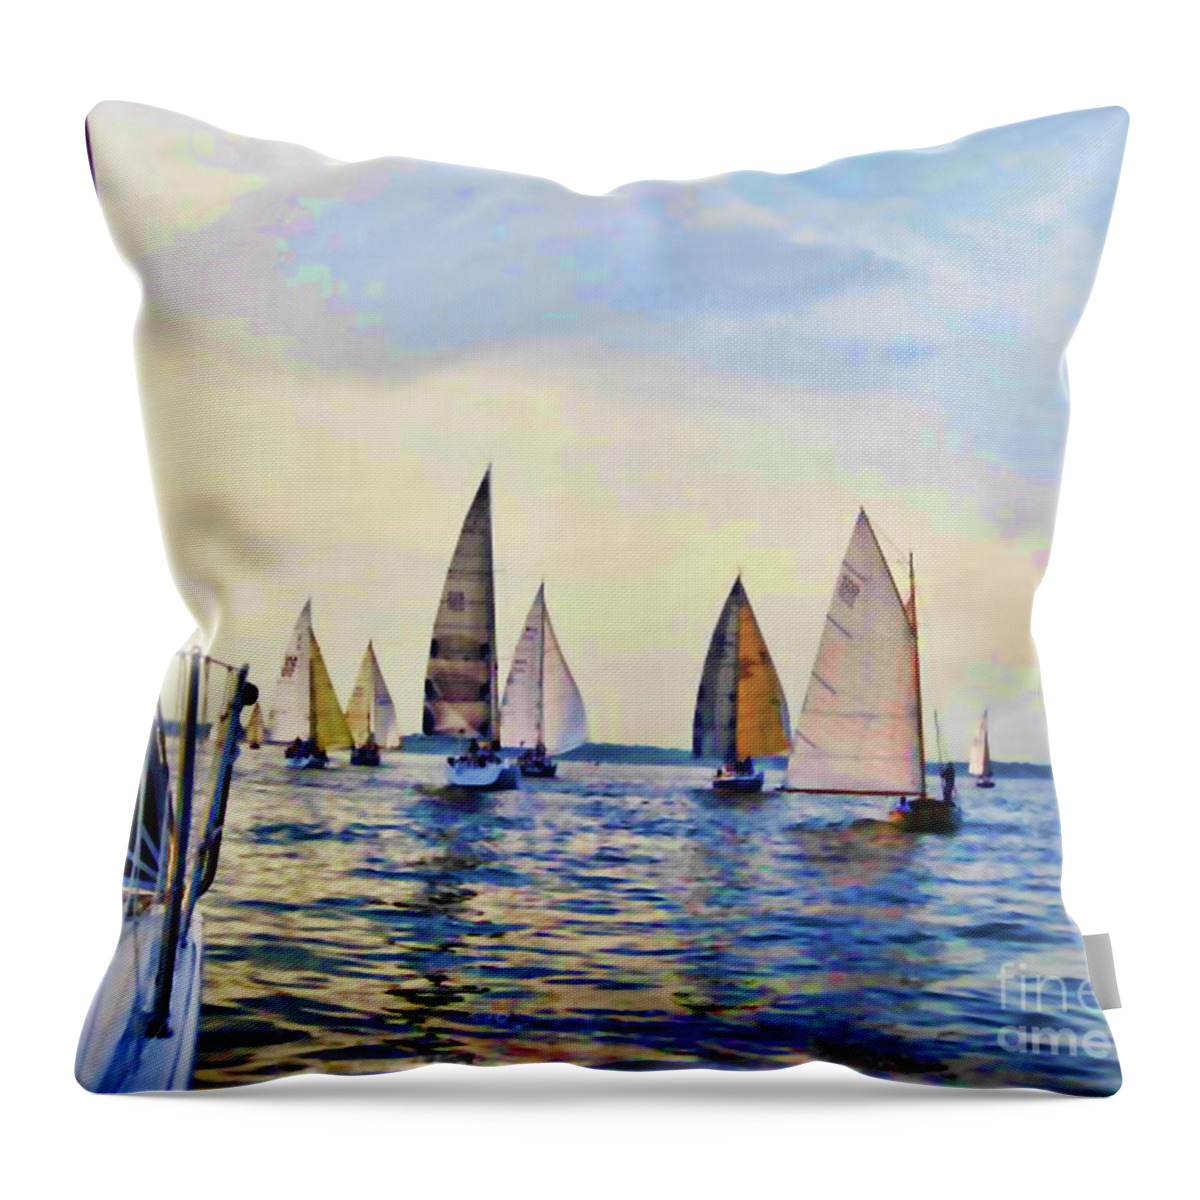 Sailboats Throw Pillow featuring the digital art A View from the Rail by Xine Segalas